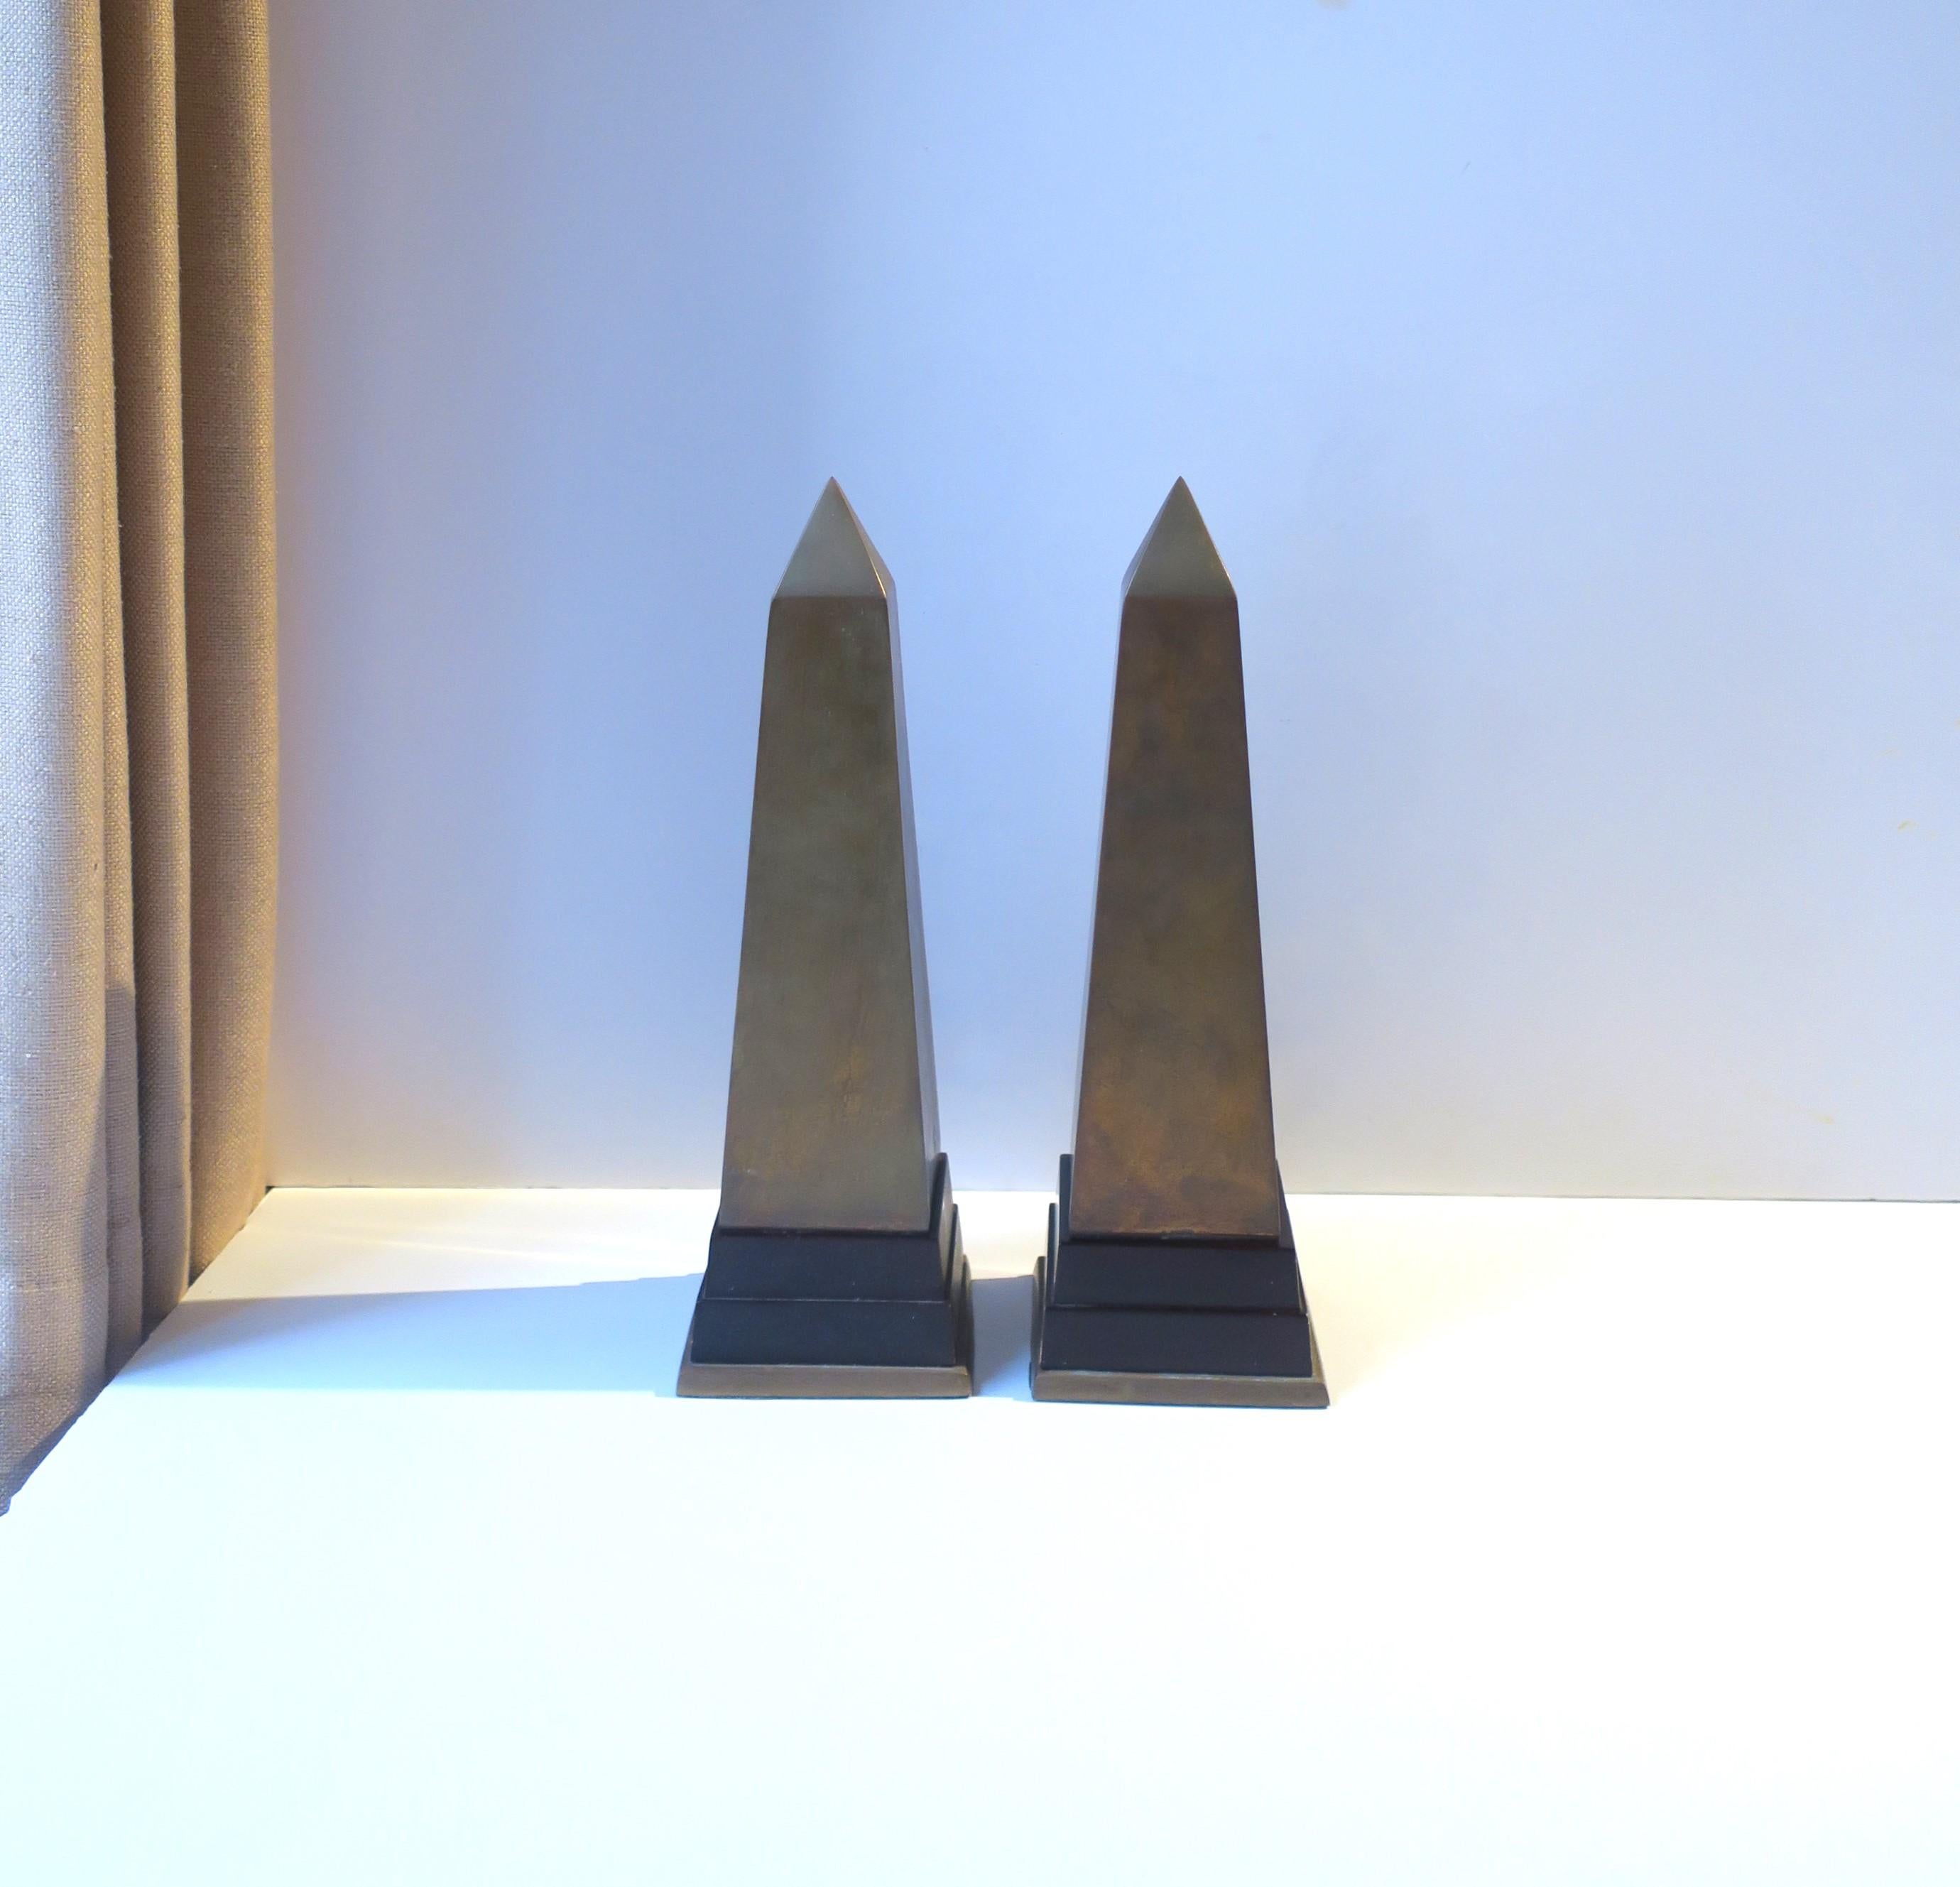 A pair of brass and wood Obelisks, in the Modern style, circa mid to late-20th century. A great set of decorative objects, statement pieces on a mantel, sideboard, bookshelf, cocktail table, etc. Brass is shown unpolished (with patina.) Dimensions: